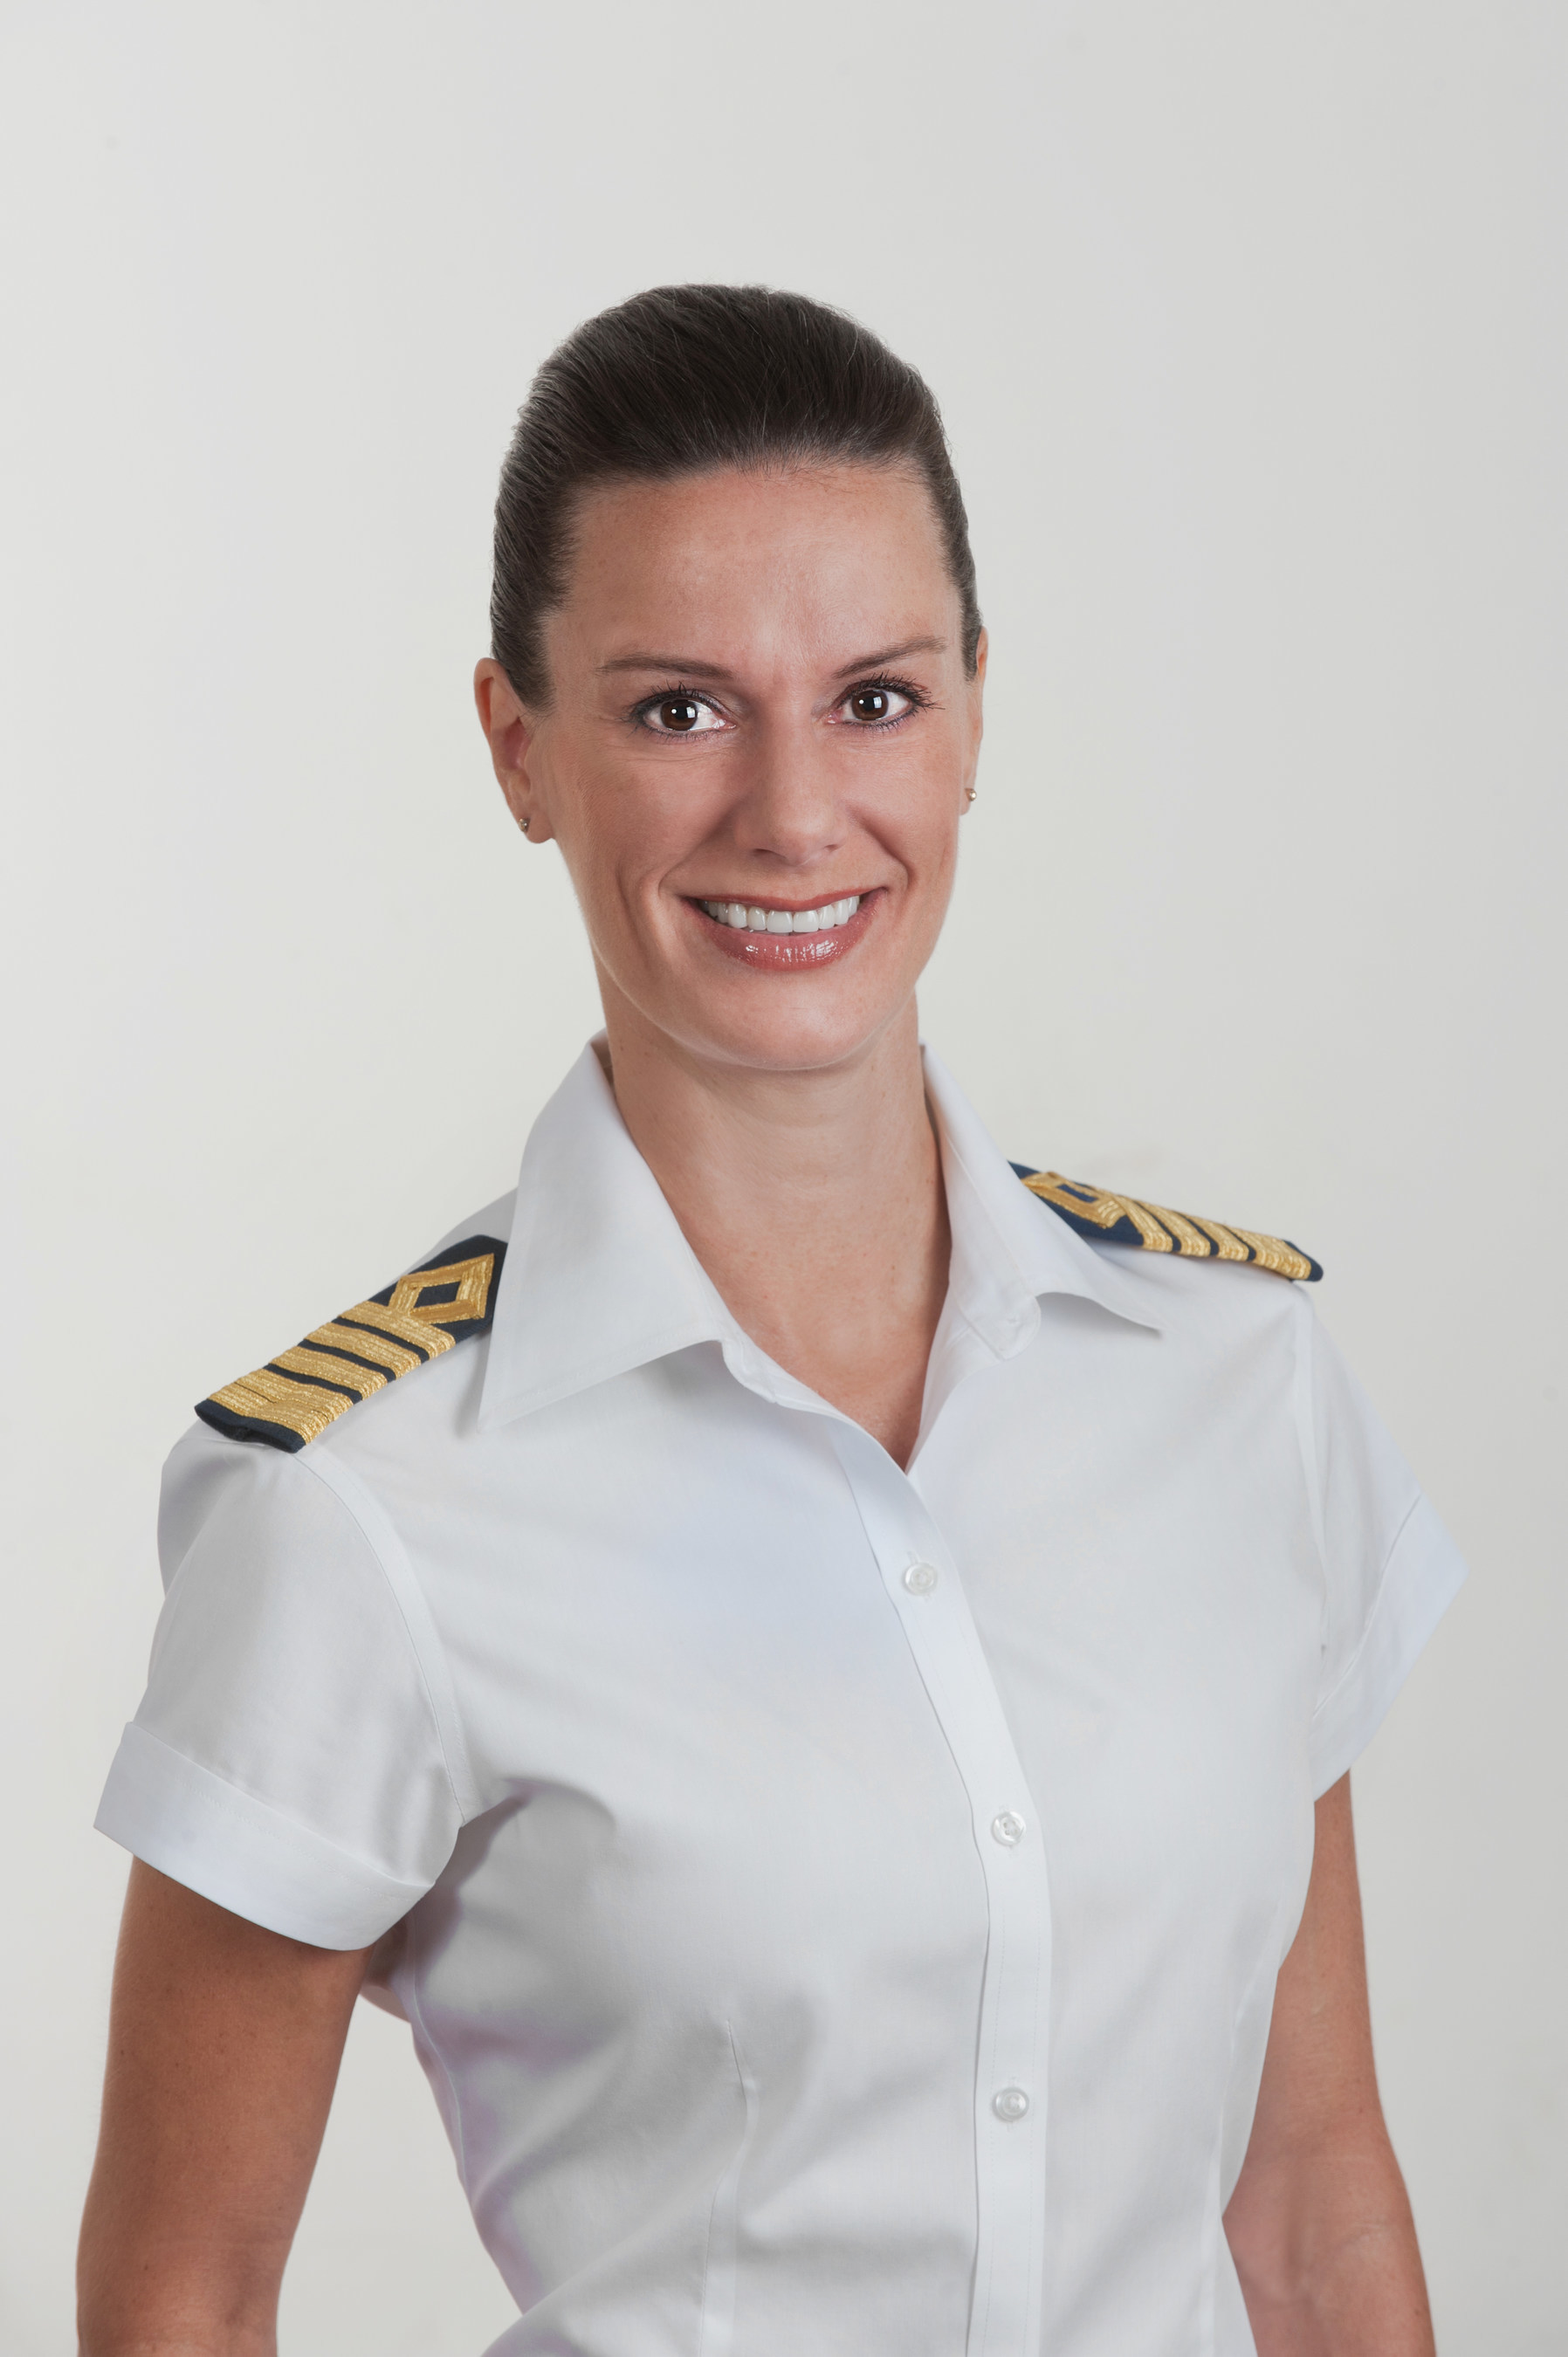 Celebrity Cruises named Kate McCue as the cruise industry's first American female captain